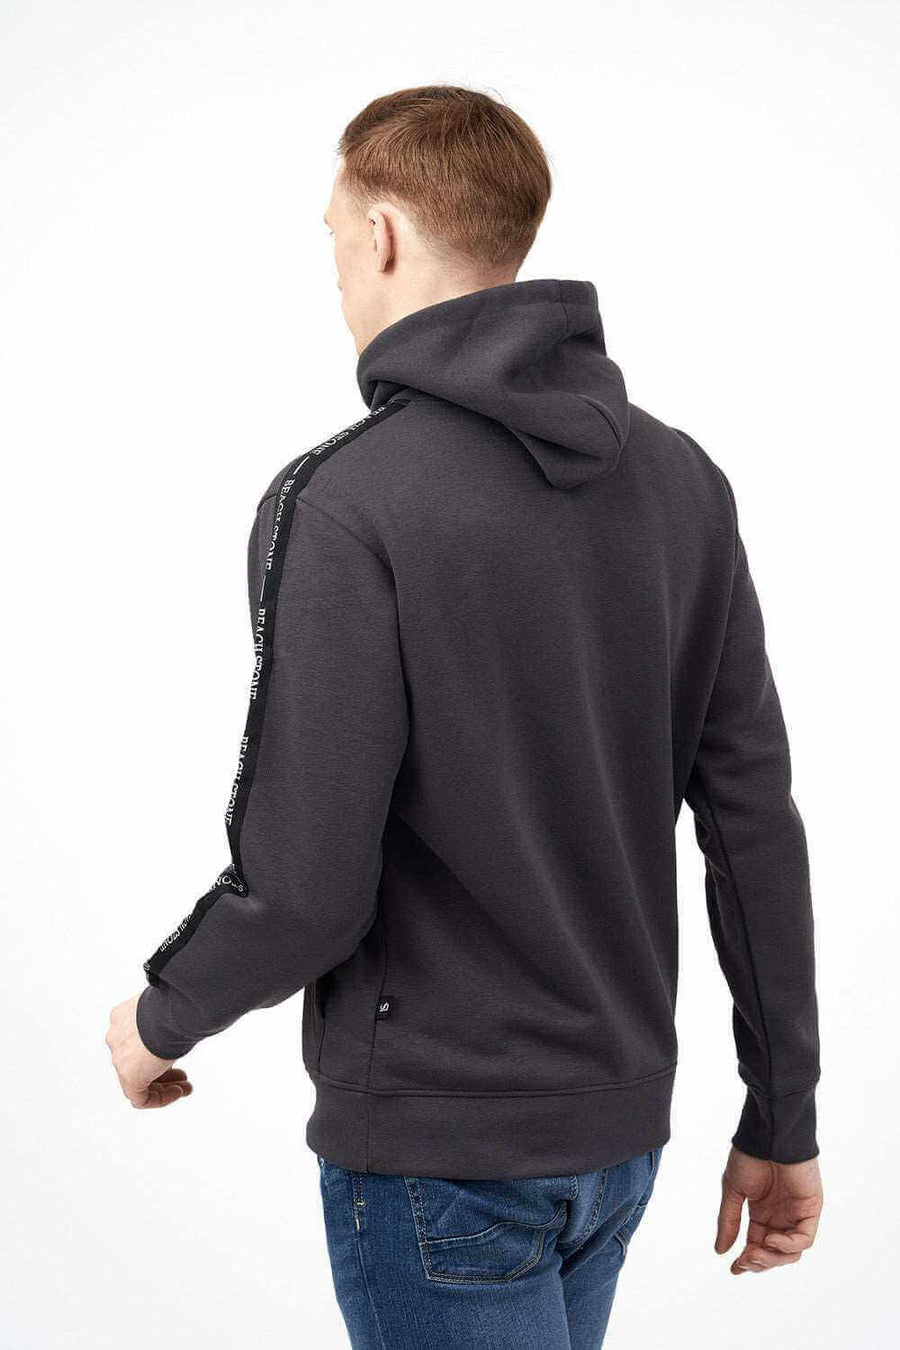 Back View of Men's Fleece Hoodie with Side Tape at Sleeves 